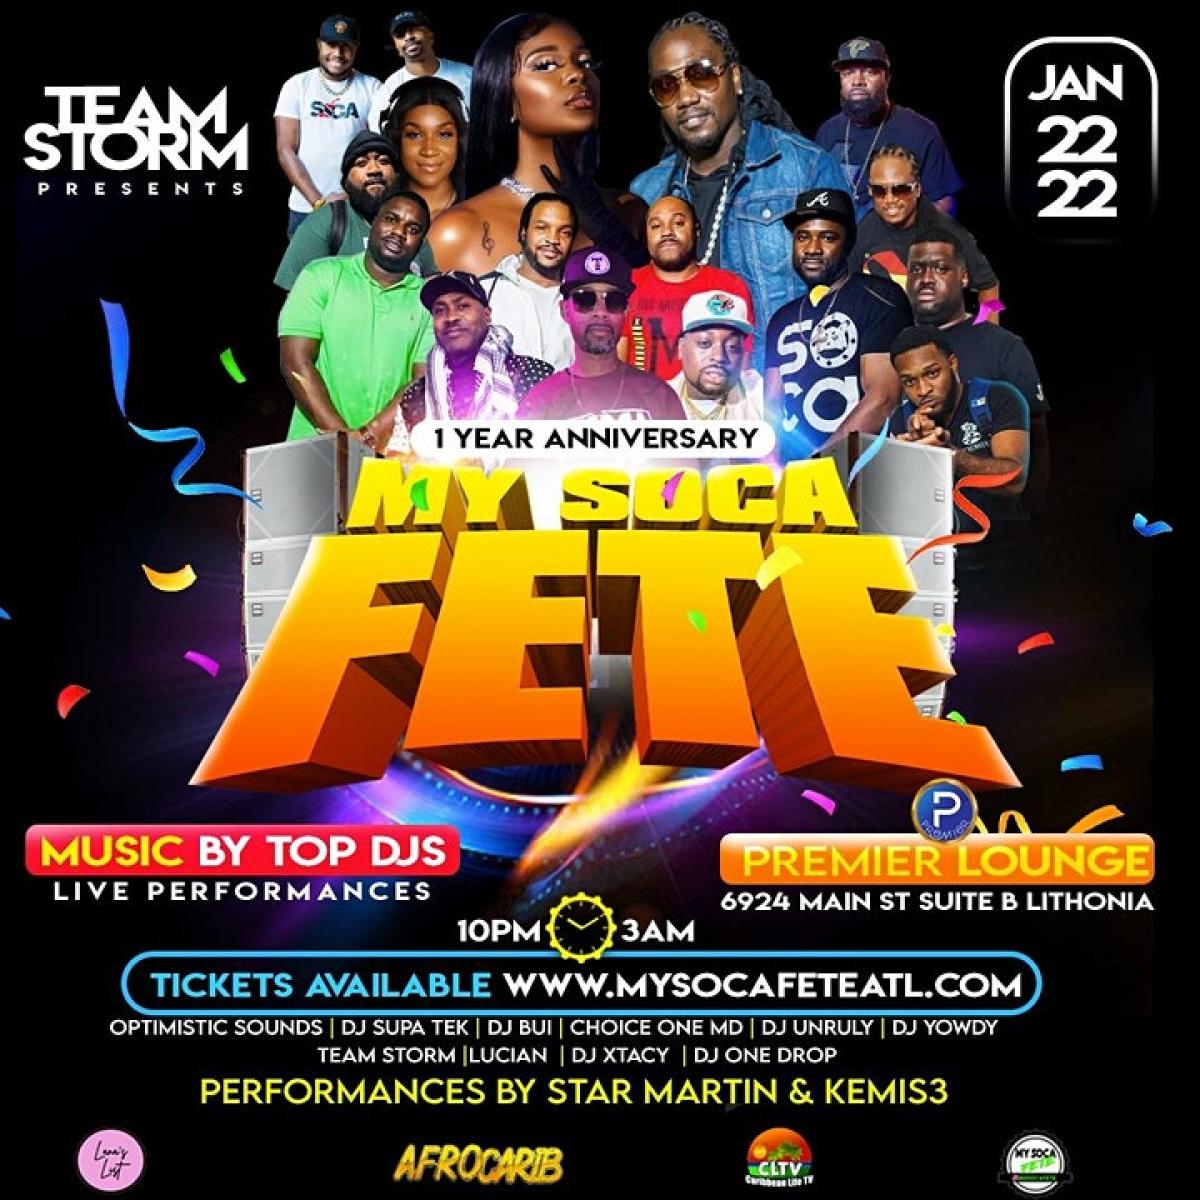 My Soca Fete  flyer or graphic.